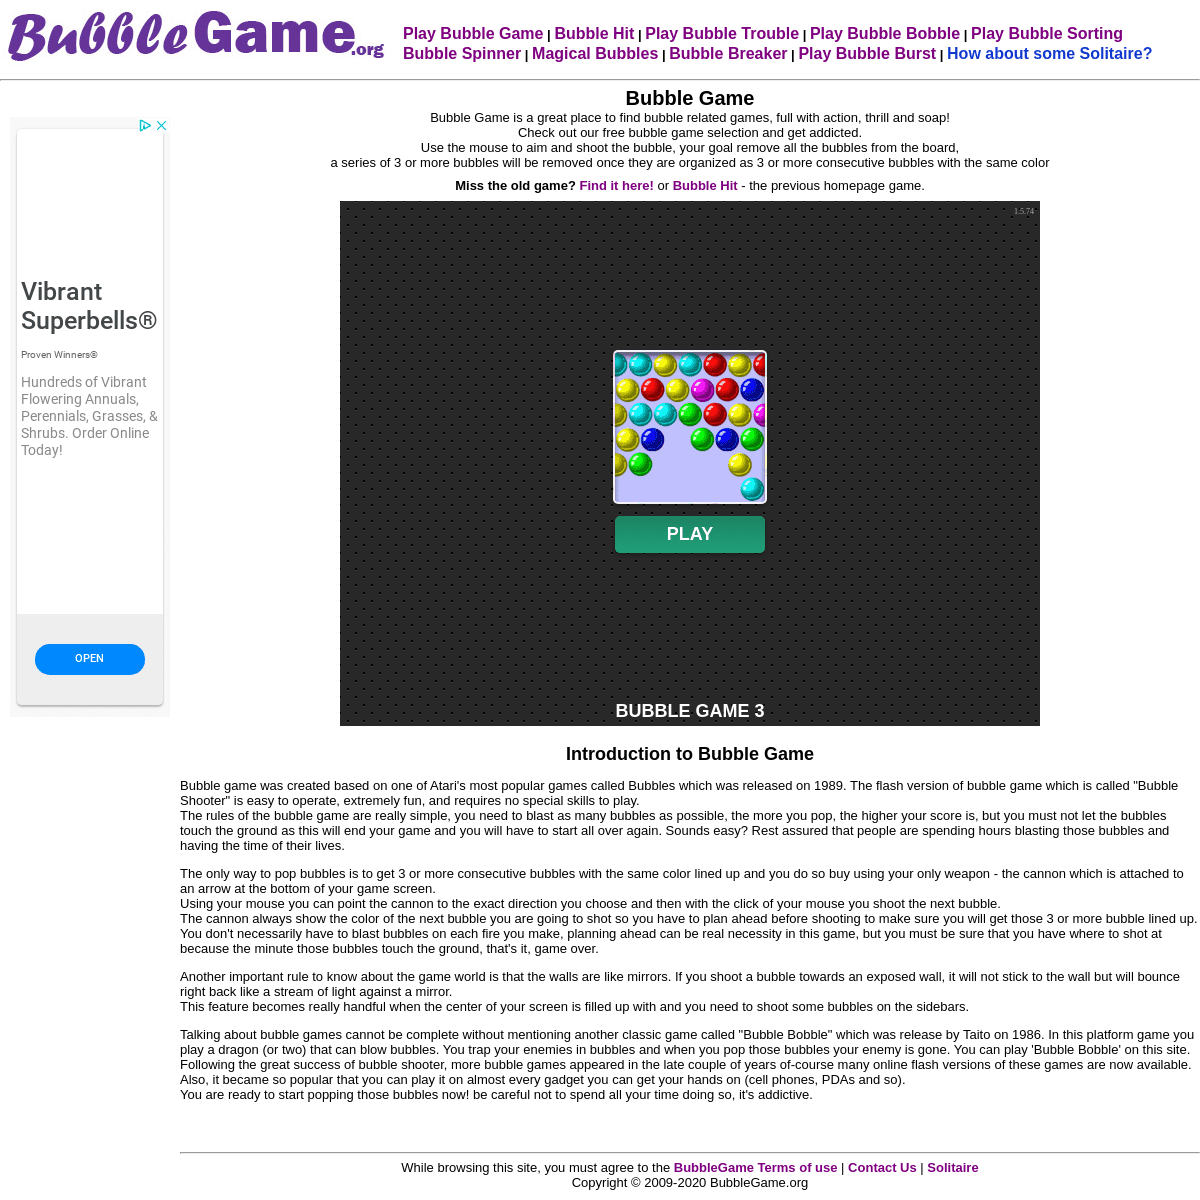 A complete backup of bubblegame.org